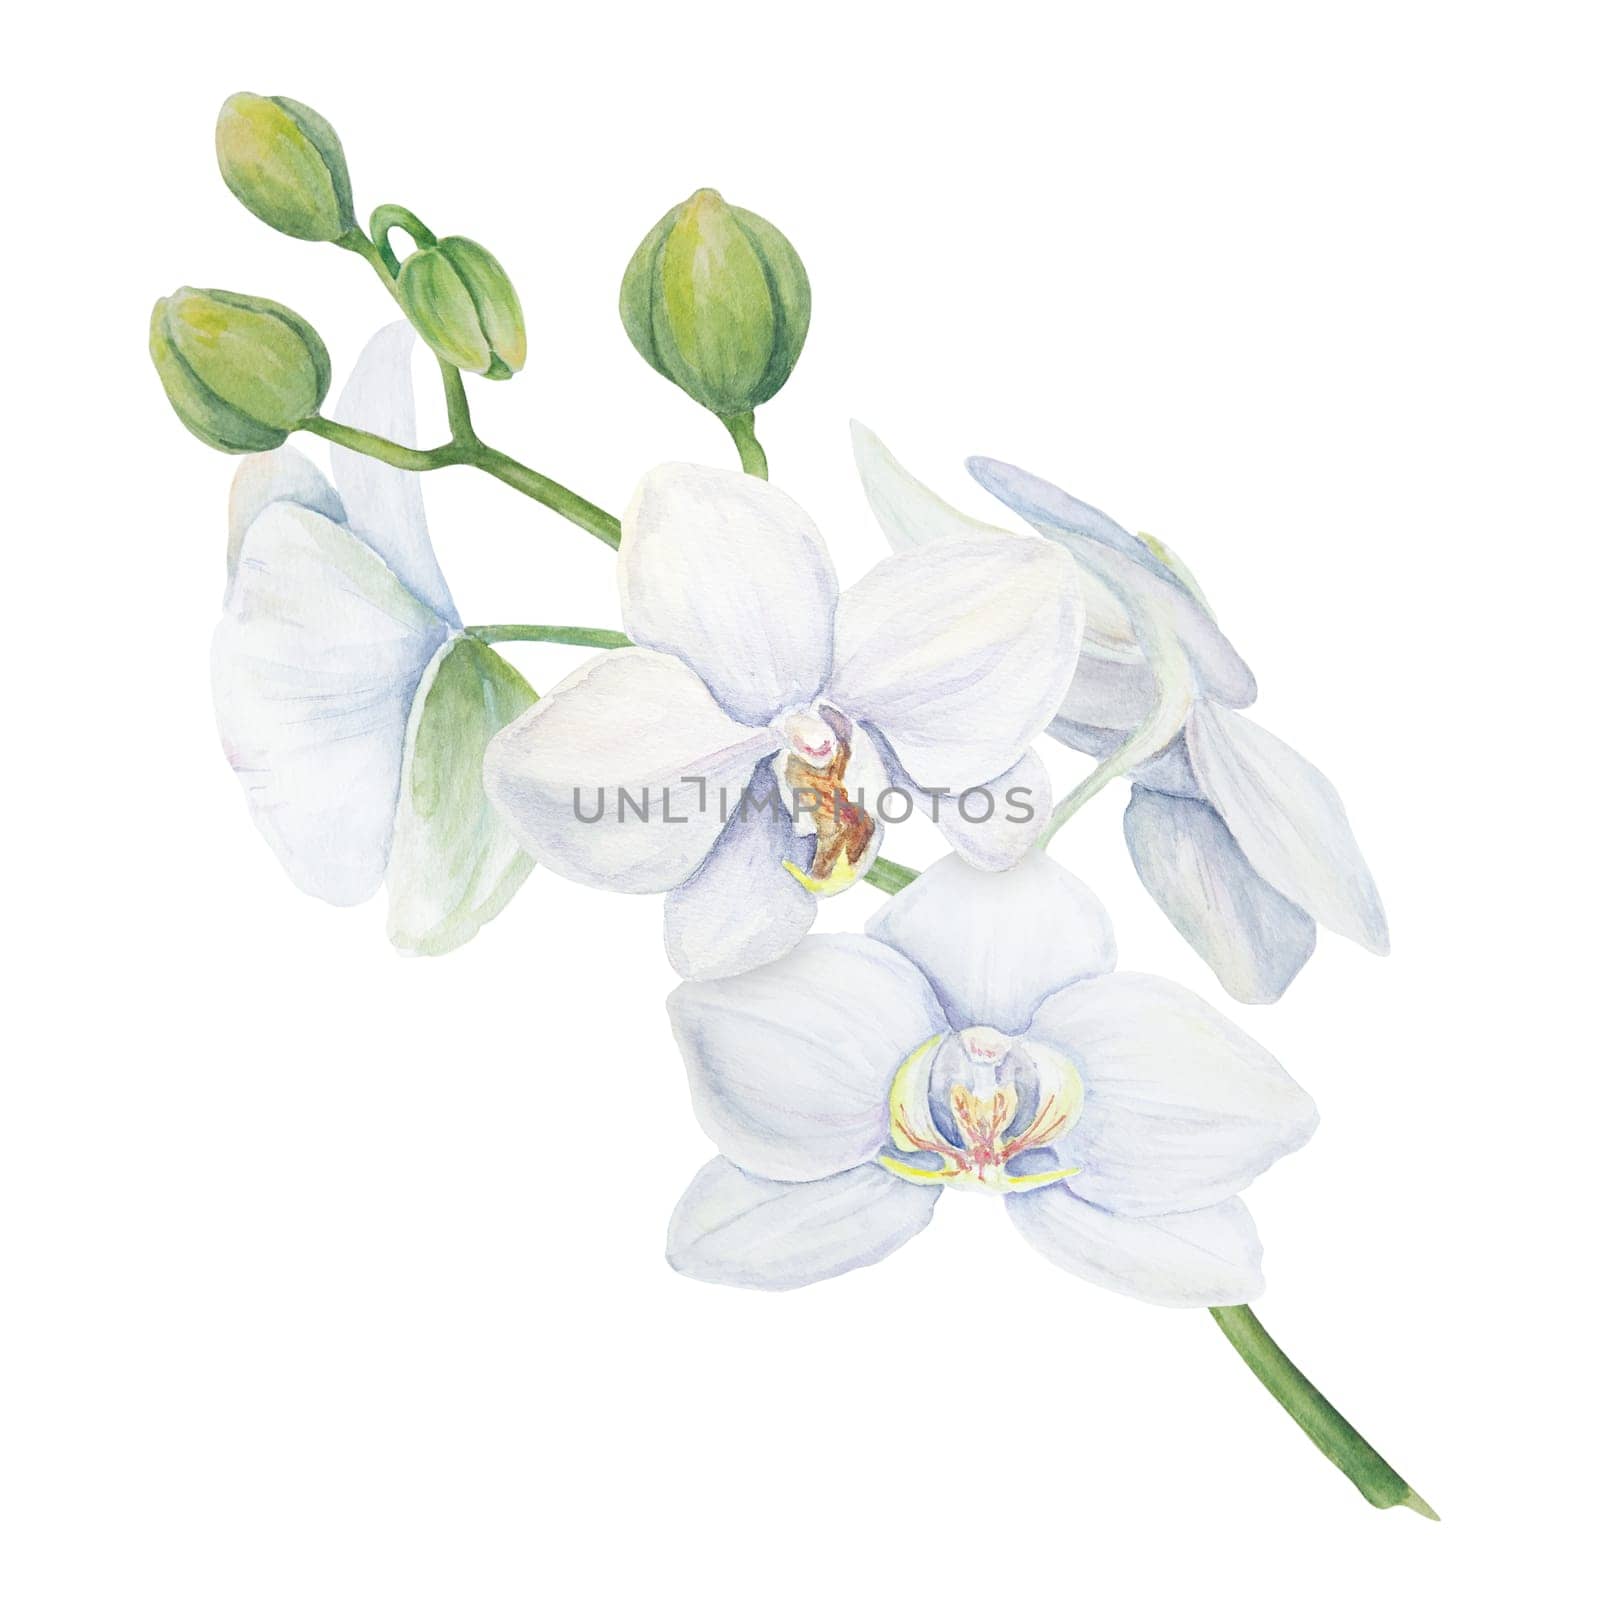 White orchid. Delicate botanical watercolor hand drawn illustration. Clipart for invitations, textiles, gifts, packaging, floristry